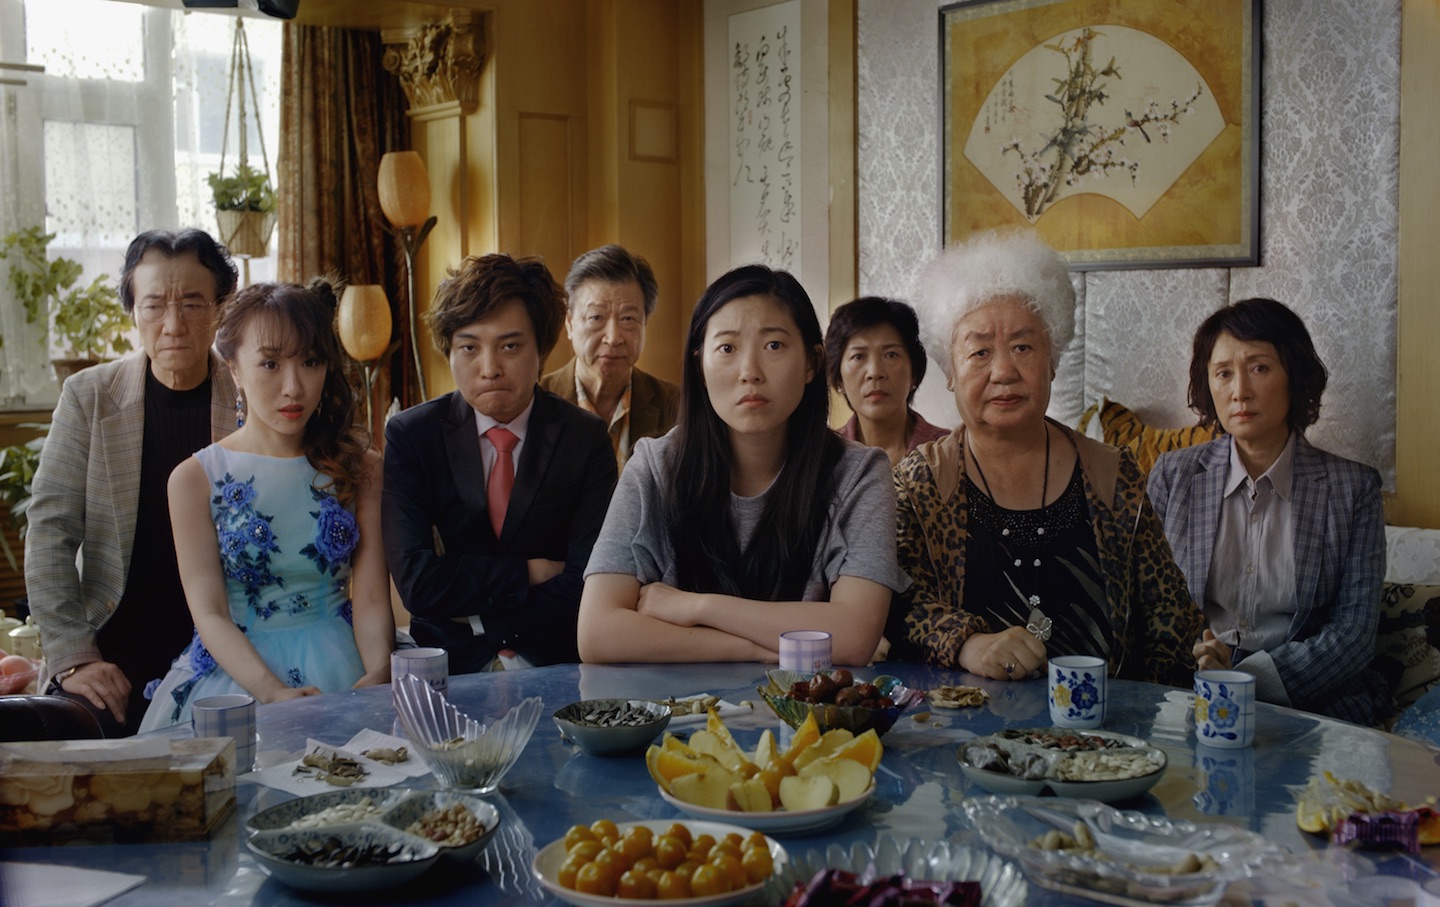 With Its Nuanced Portrayal of Asian American Life, ‘The Farewell’ Shines